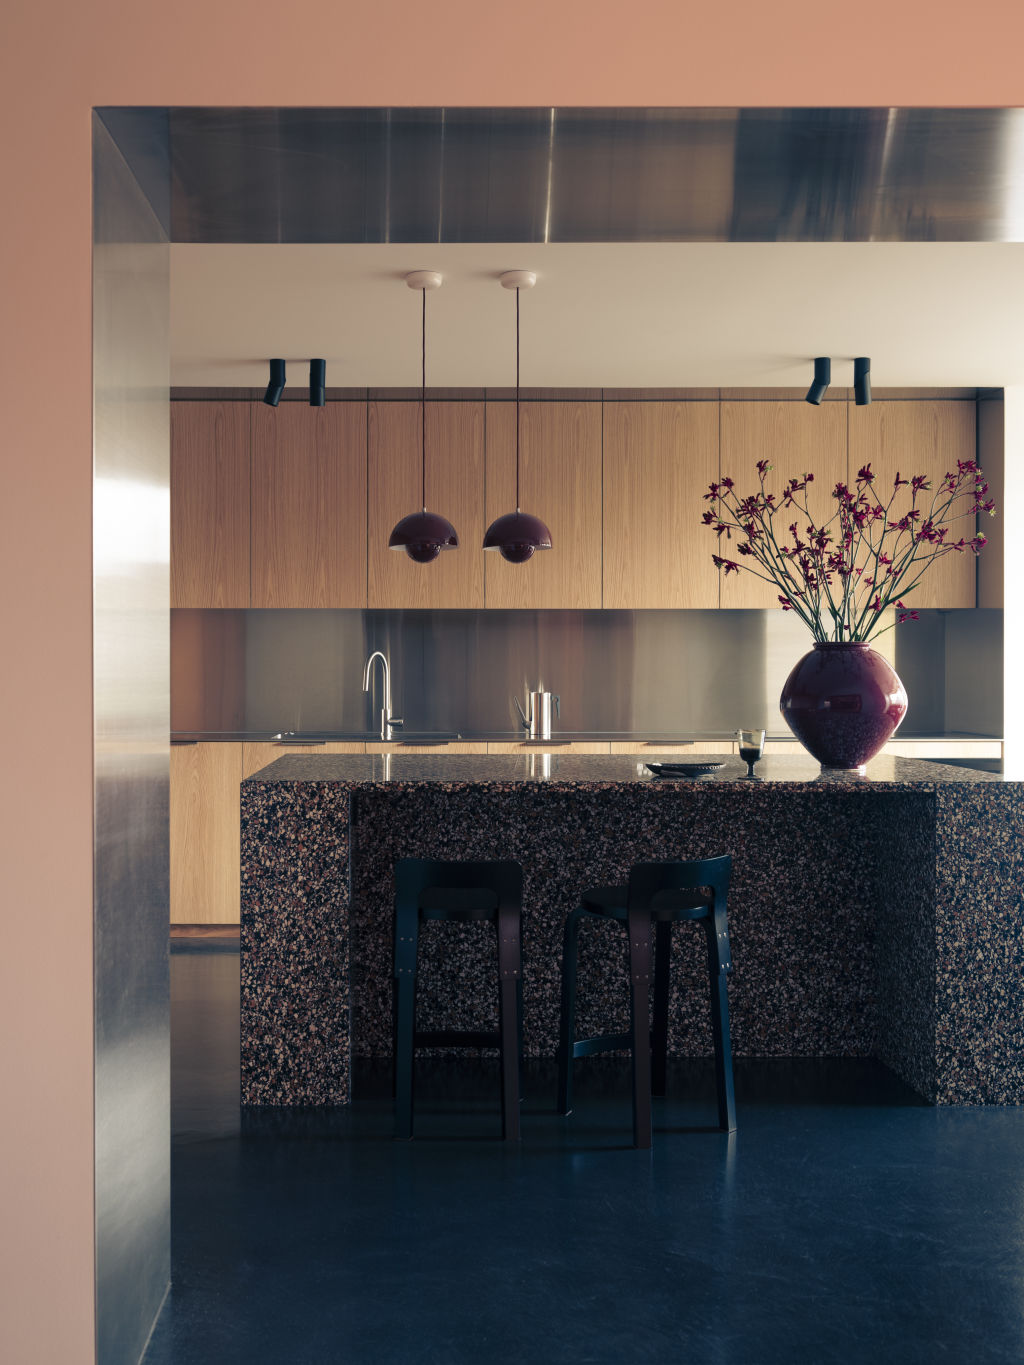 Studio Prineas principal Eva-Marie Prineas selected stainless steel for her residential project, Doria Apartment in Sydney's Double Bay, layering it with timber, terracotta-toned cabinetry, and terrazzo. Photo: Felix Forrest